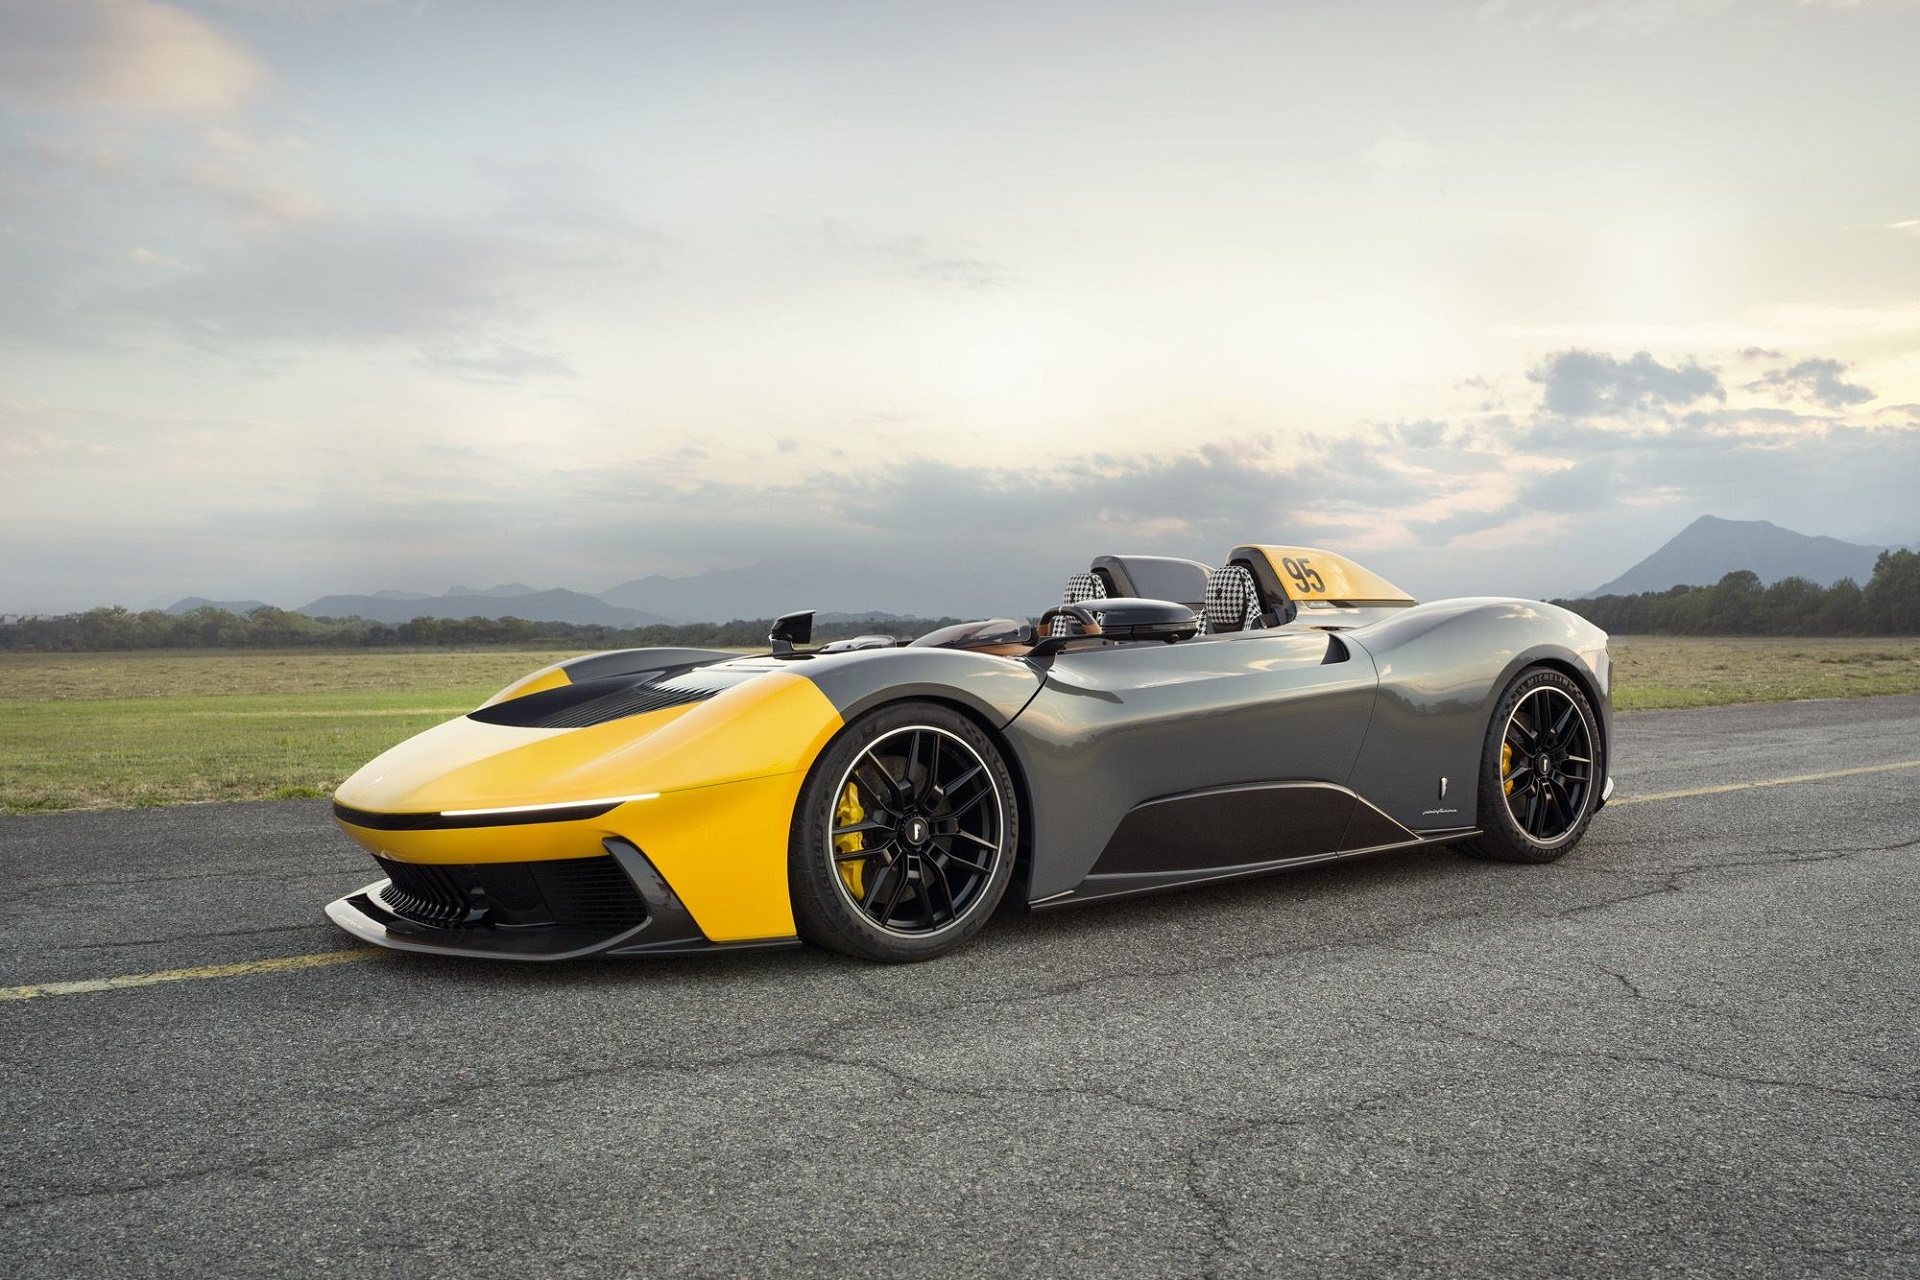  front angled view of the Pininfarina B95 electric speedster, finished in yellow and grey.